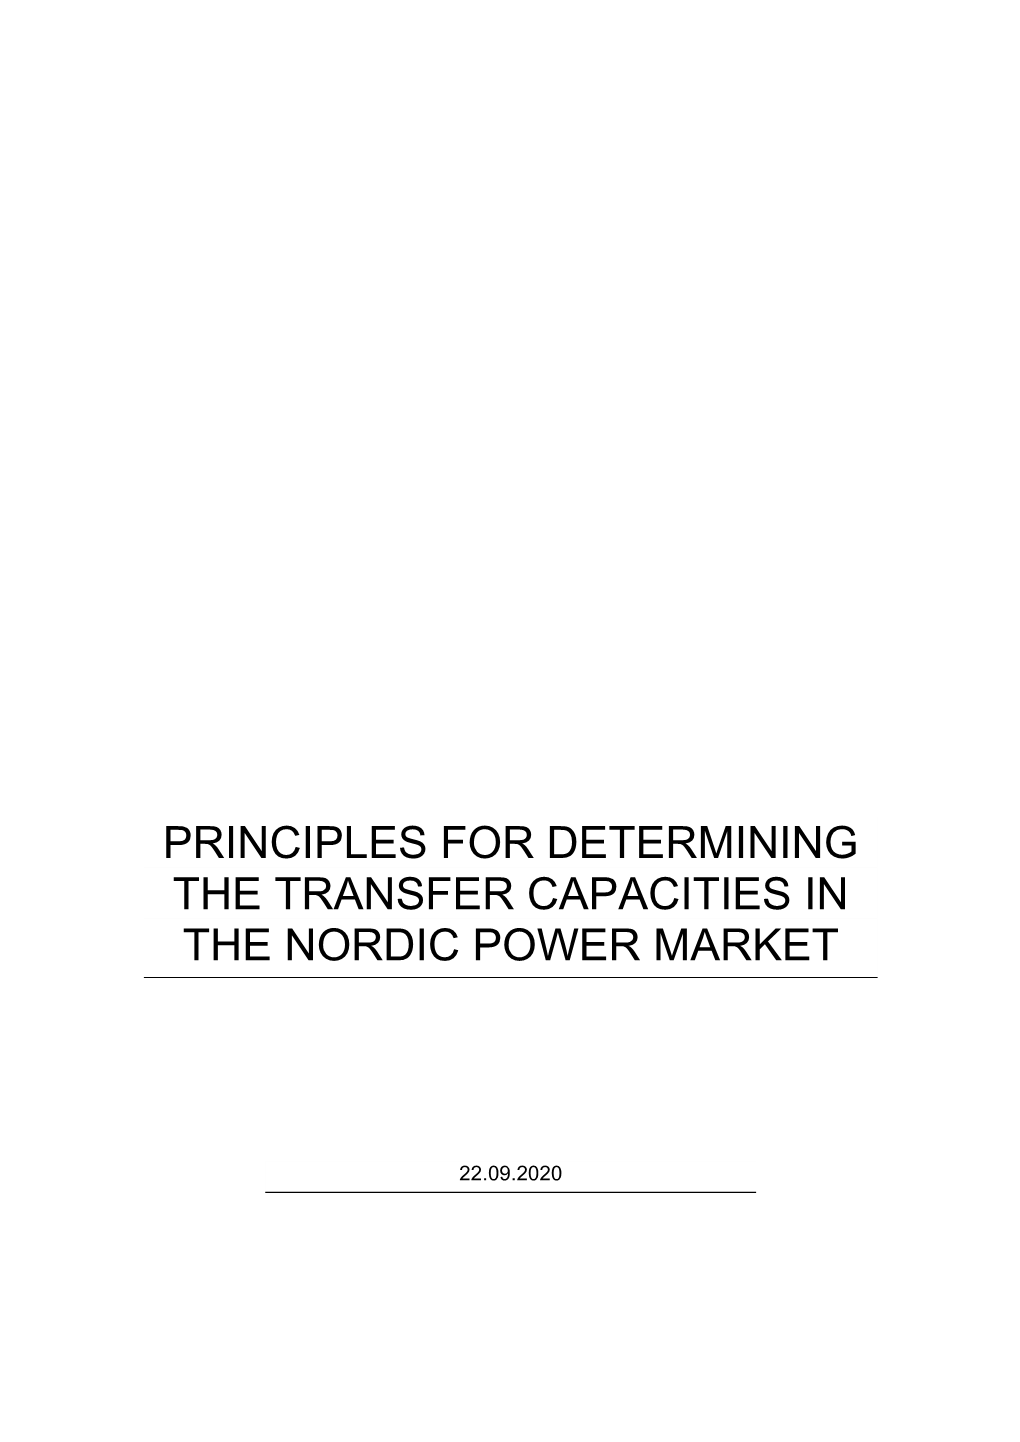 Principles for Determining the Transfer Capacities in the Nordic Power Market